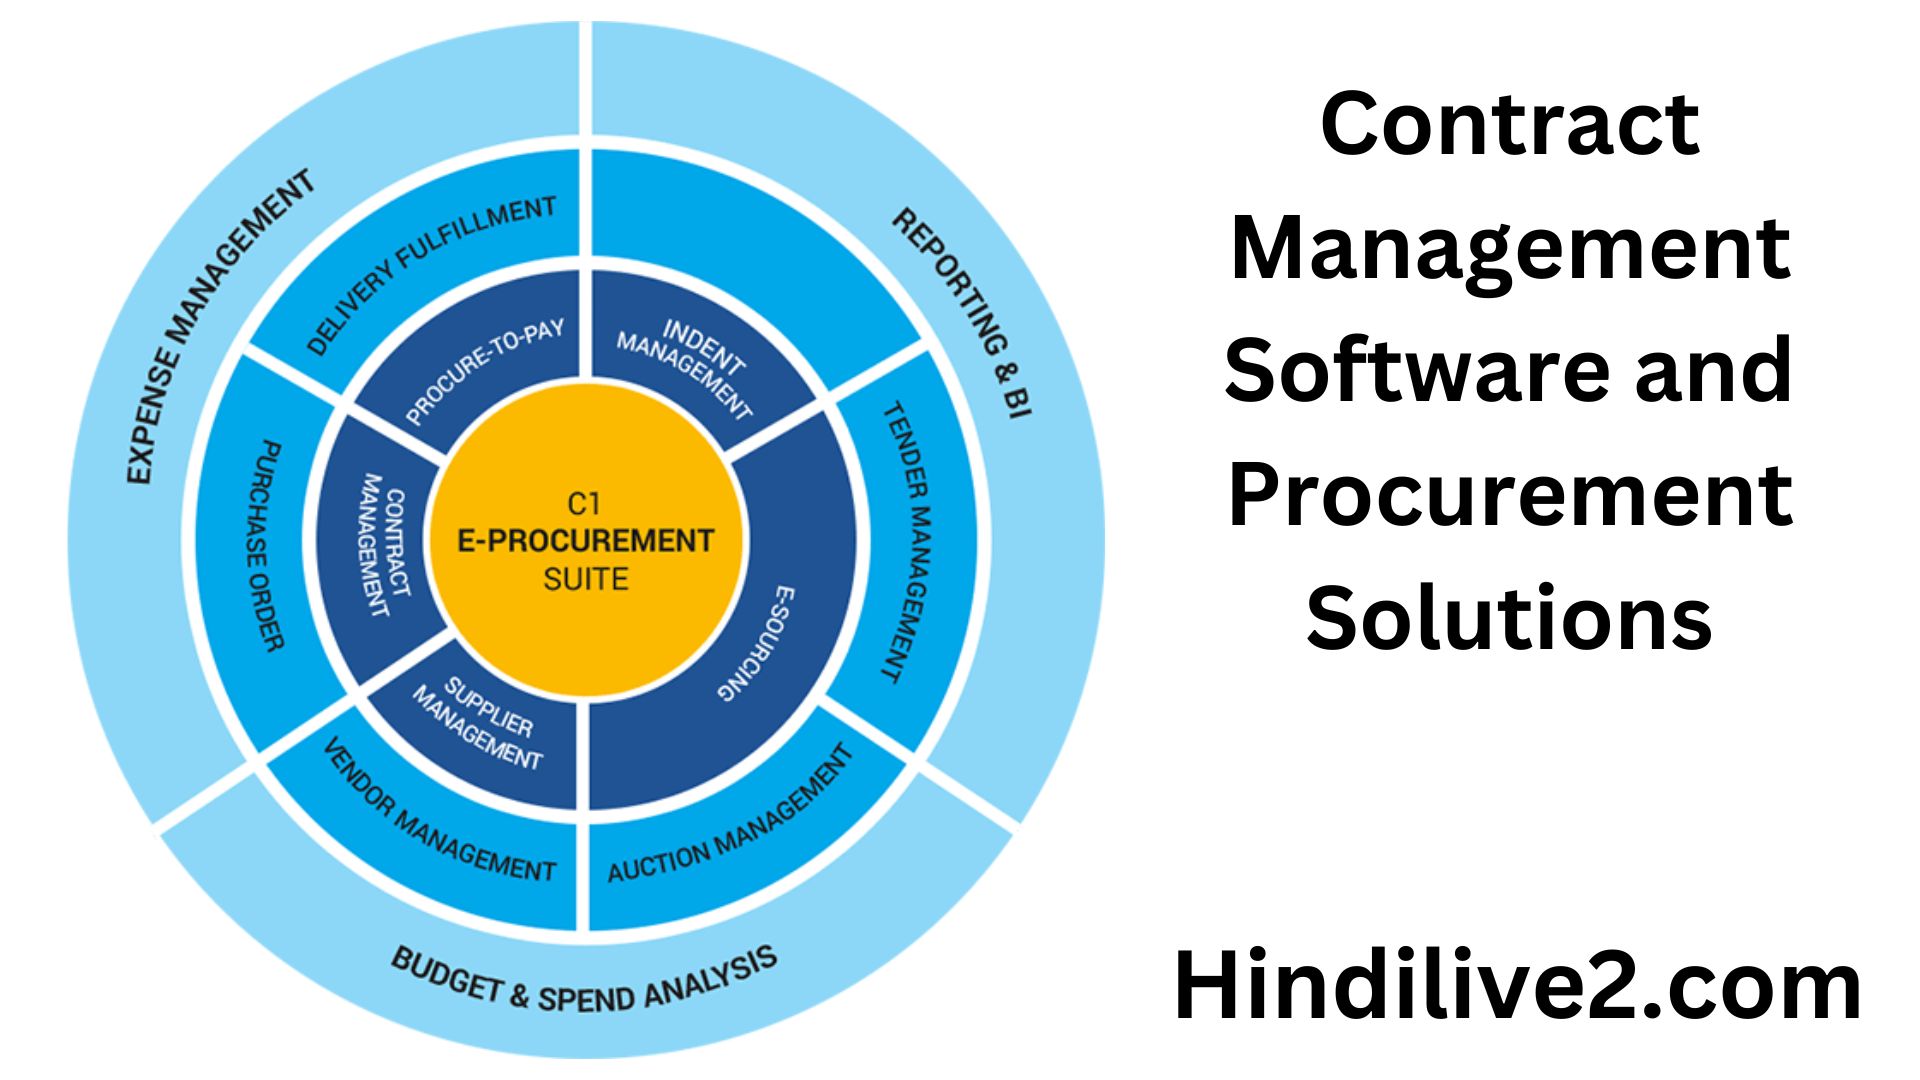 , Contract management software and procurement solutions pdf, Contract management software and procurement solutions reviews, contract management software examples, contract management software free, contract management software for legal departments, top contract management software, contract management software india, vendor contract management software,